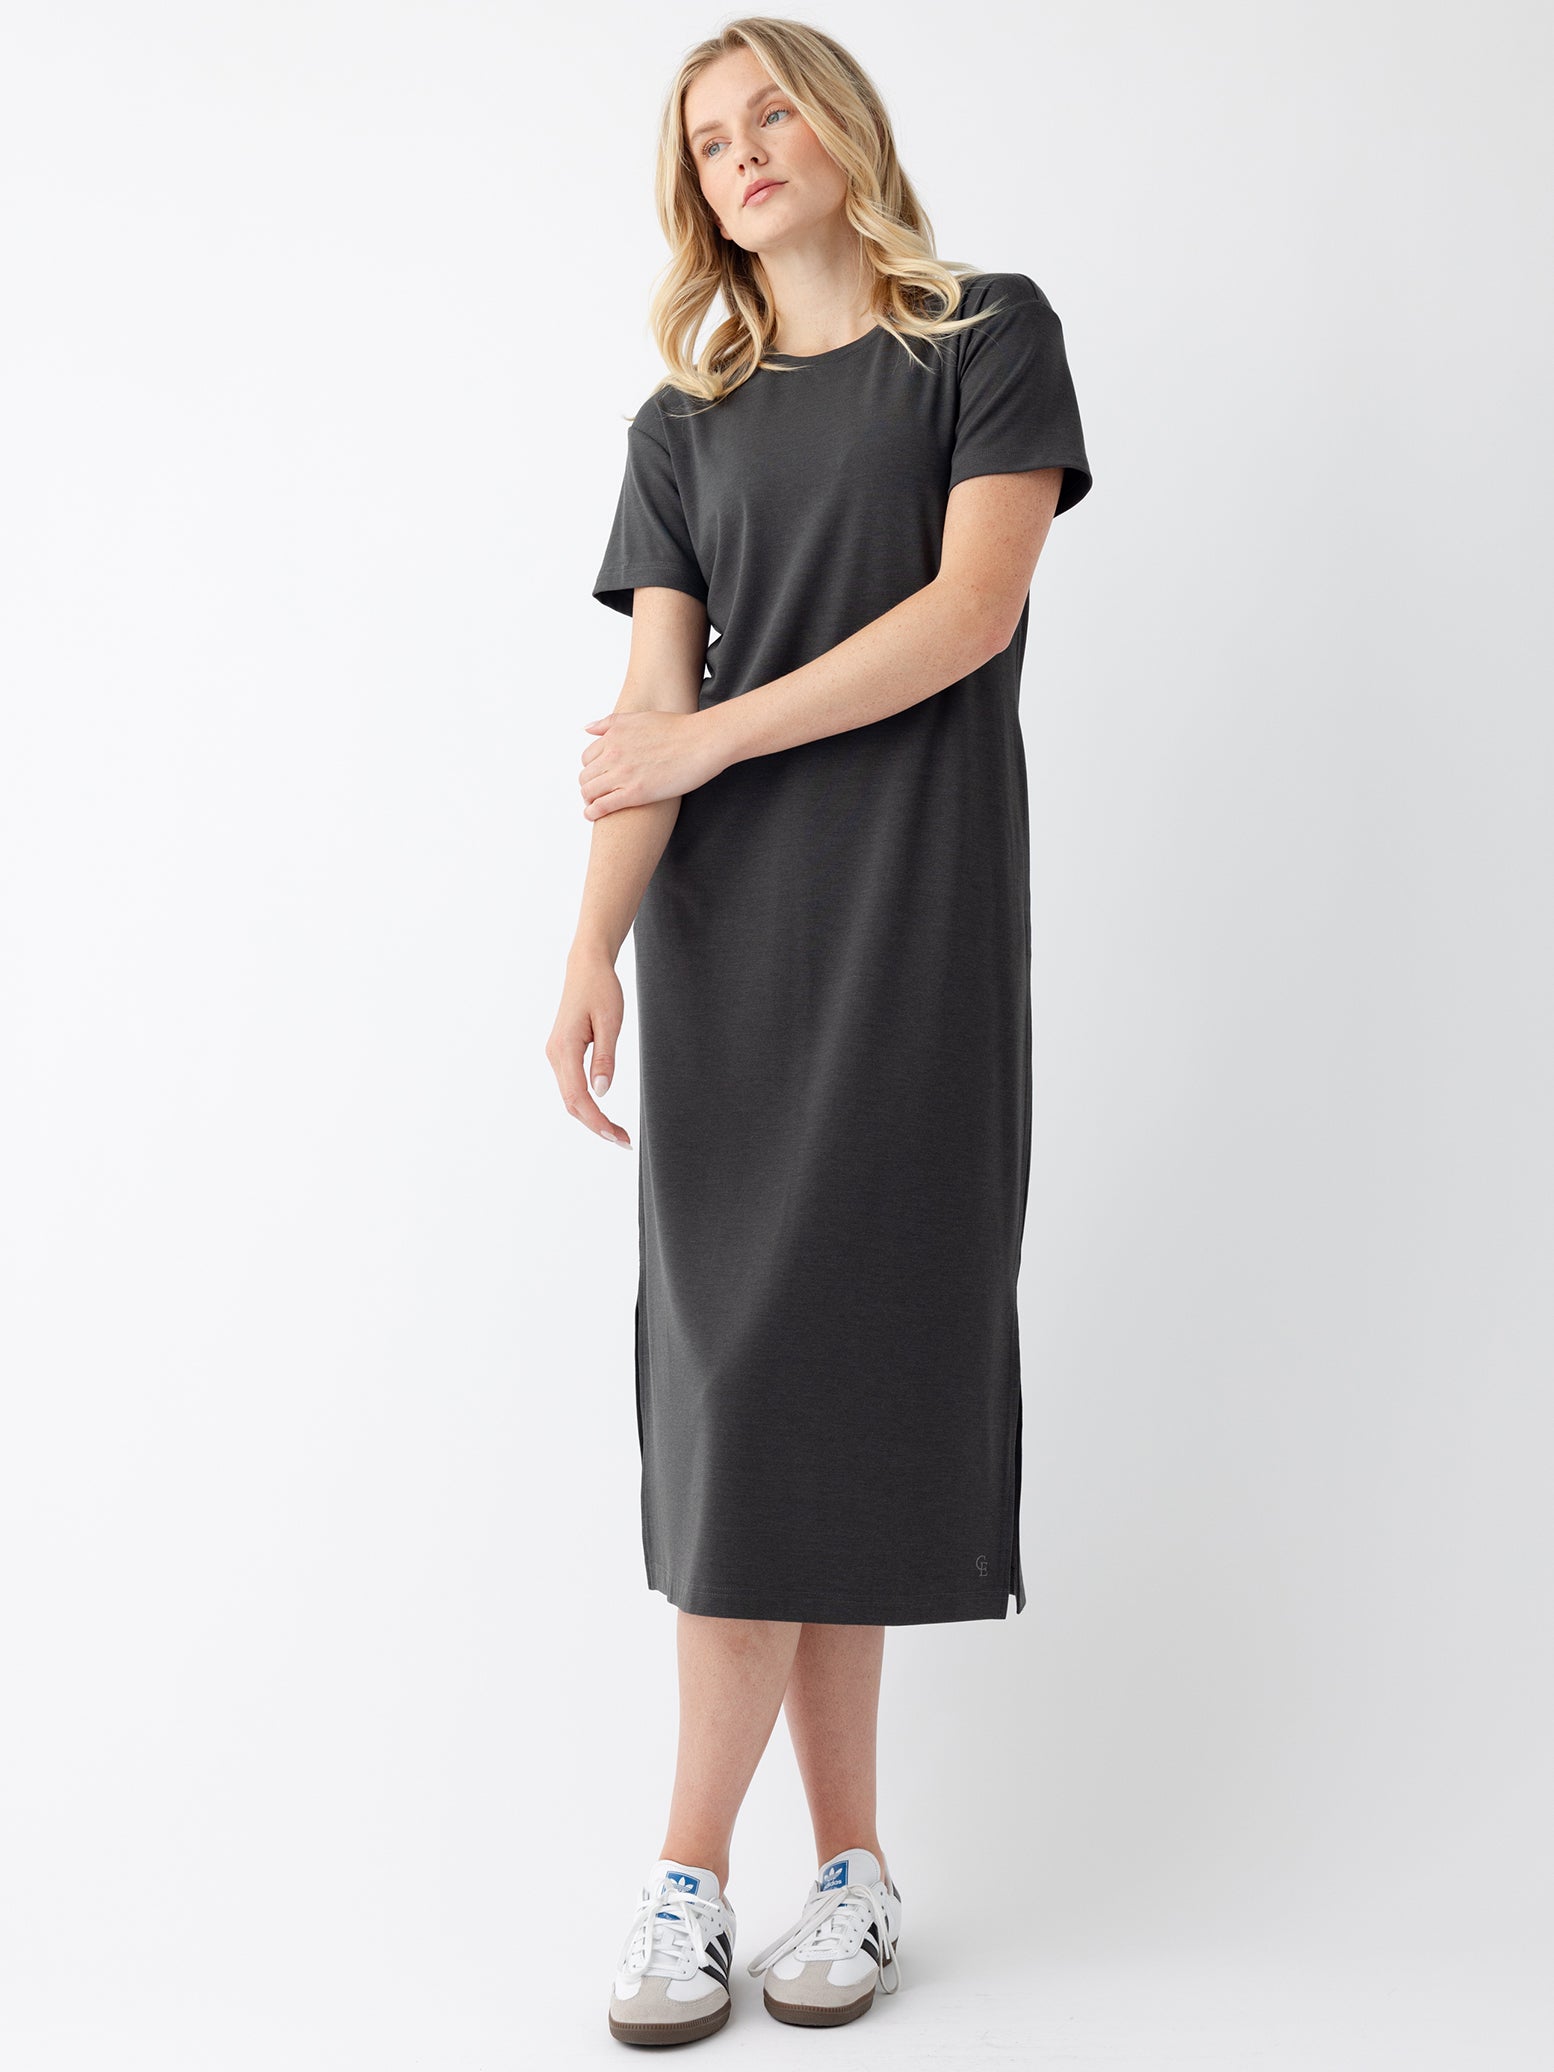 Woman in charcoal midi dress with white background 